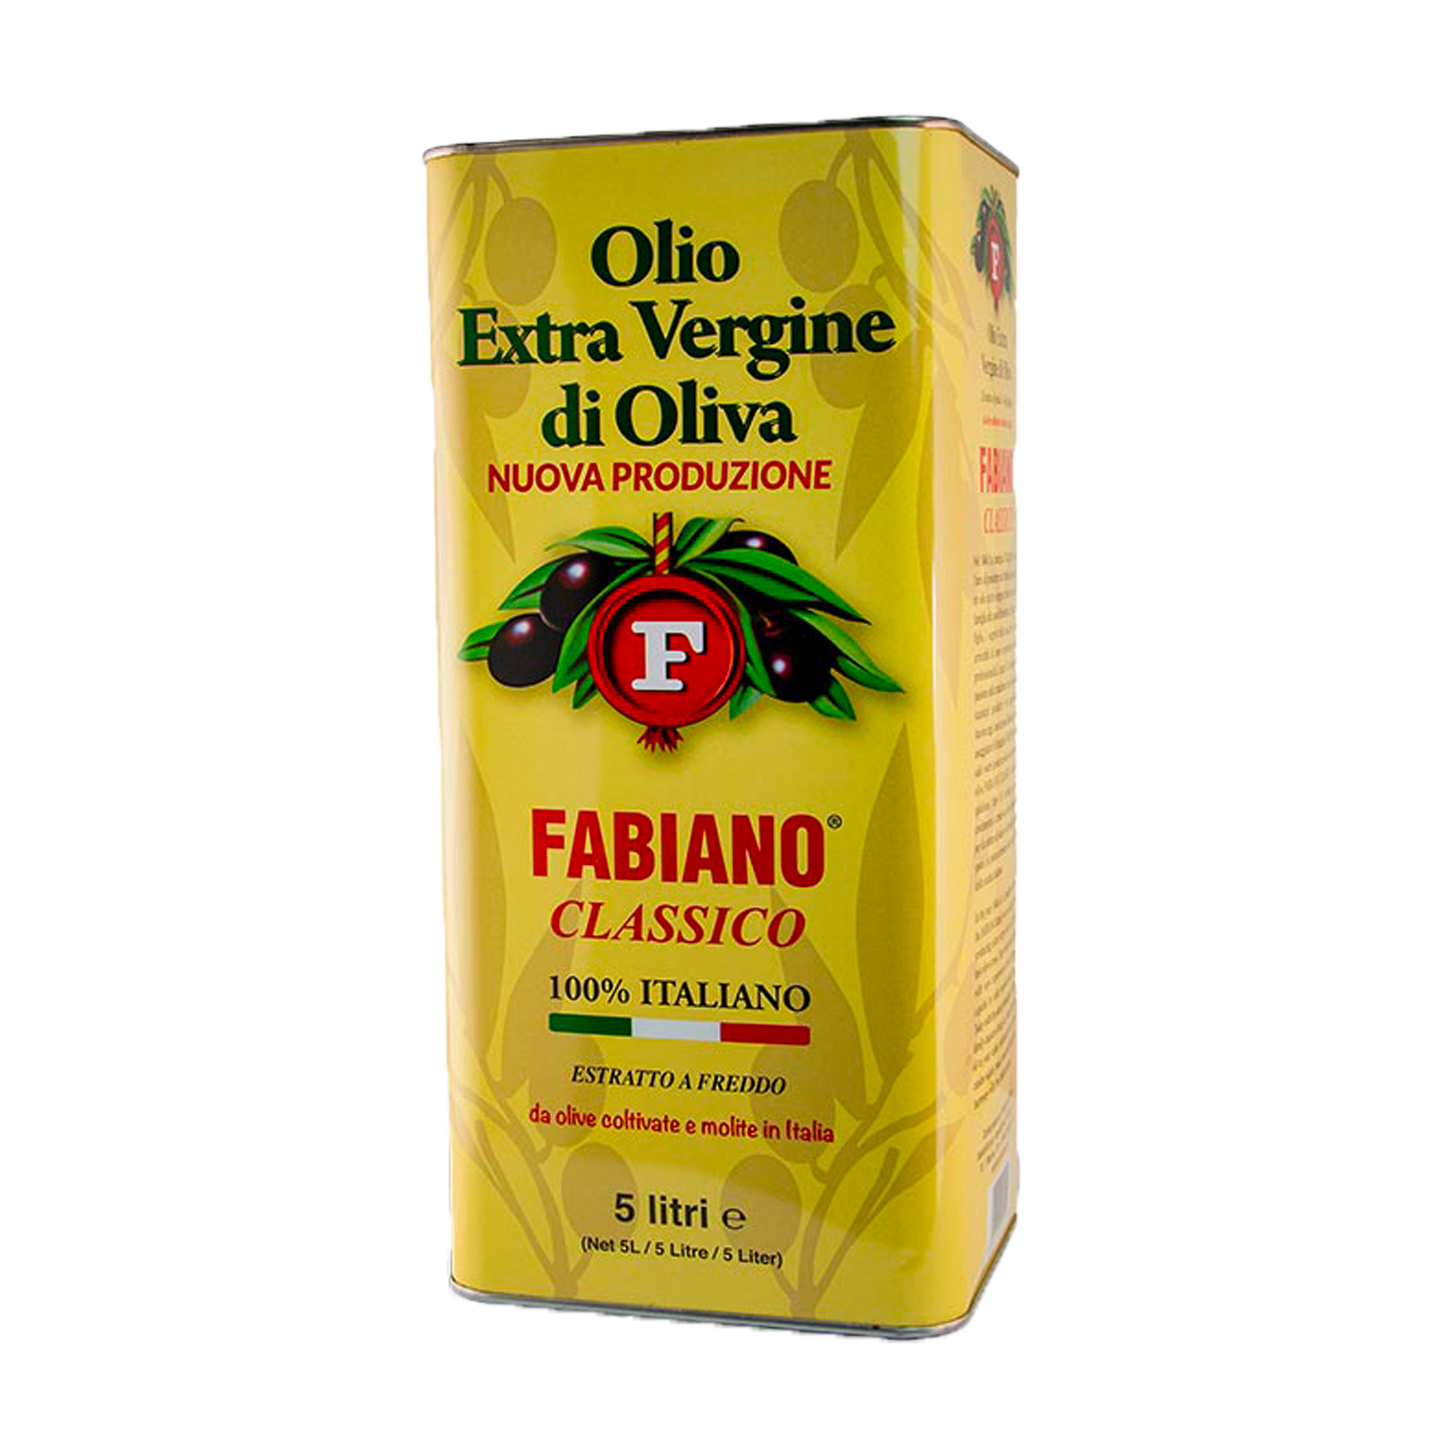 Extra virgin olive oil 5L can